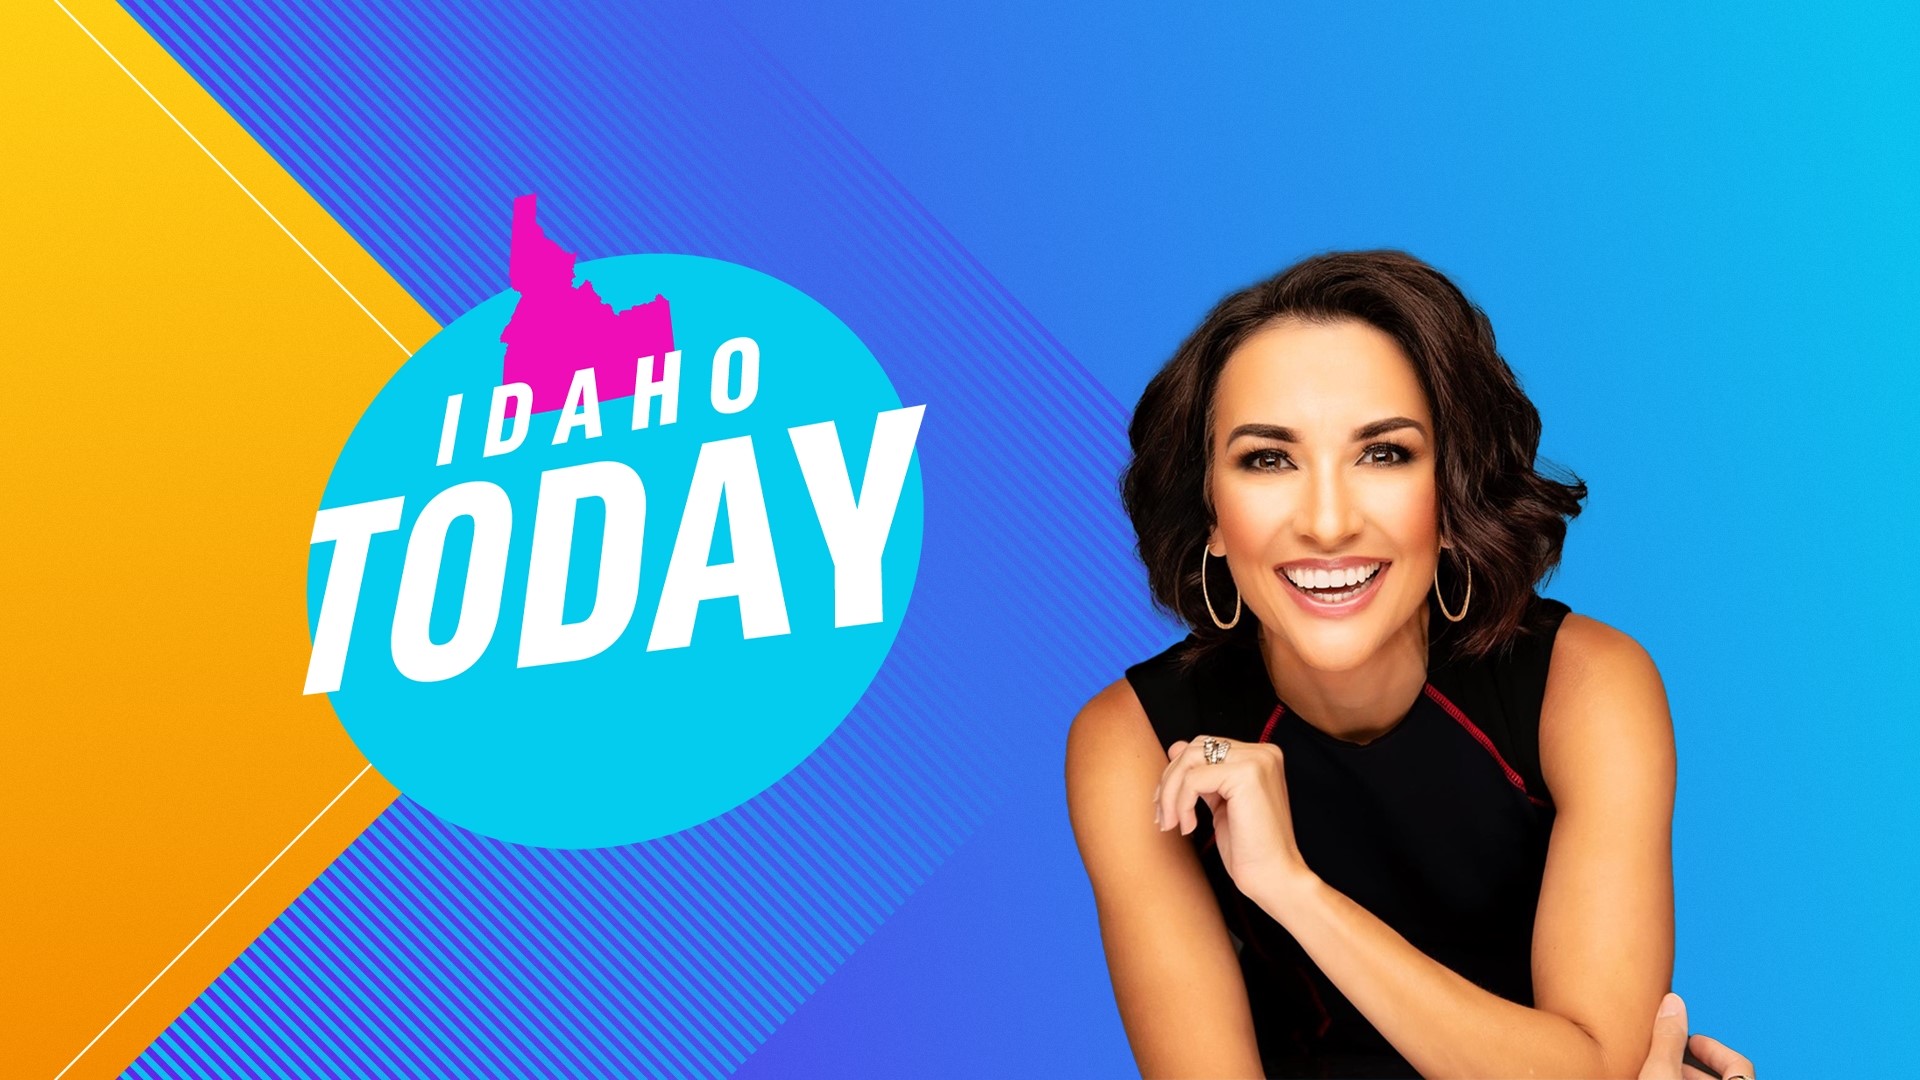 Hosted by Emmy Award winning journalist and Idaho native Mellisa Paul, Idaho Today is a lifestyle program on KTVB that showcases the people, products, services, and 